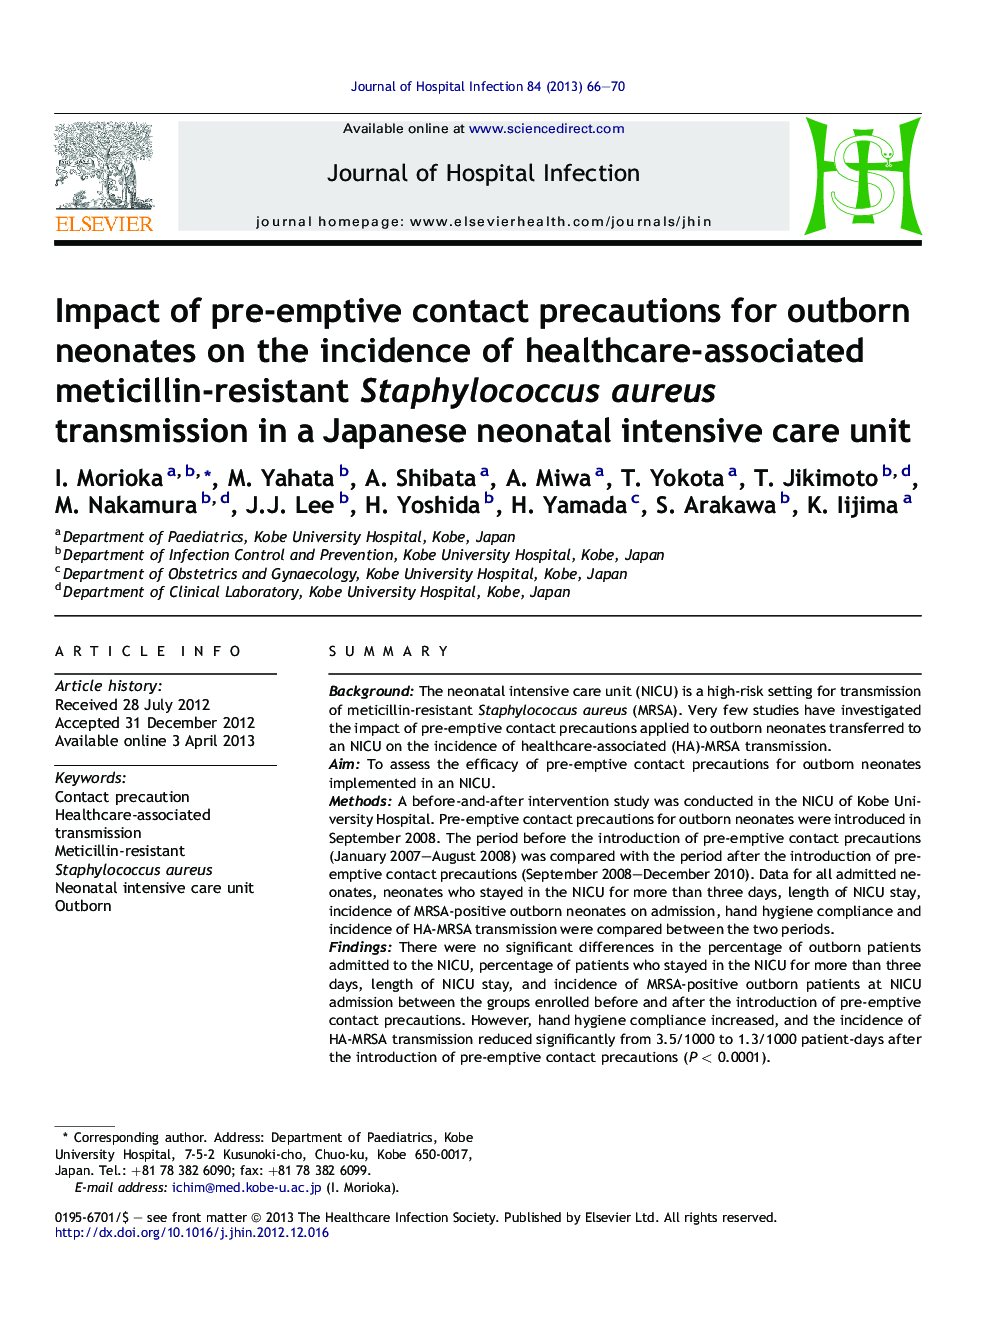 Impact of pre-emptive contact precautions for outborn neonates on the incidence of healthcare-associated meticillin-resistant Staphylococcus aureus transmission in a Japanese neonatal intensive care unit